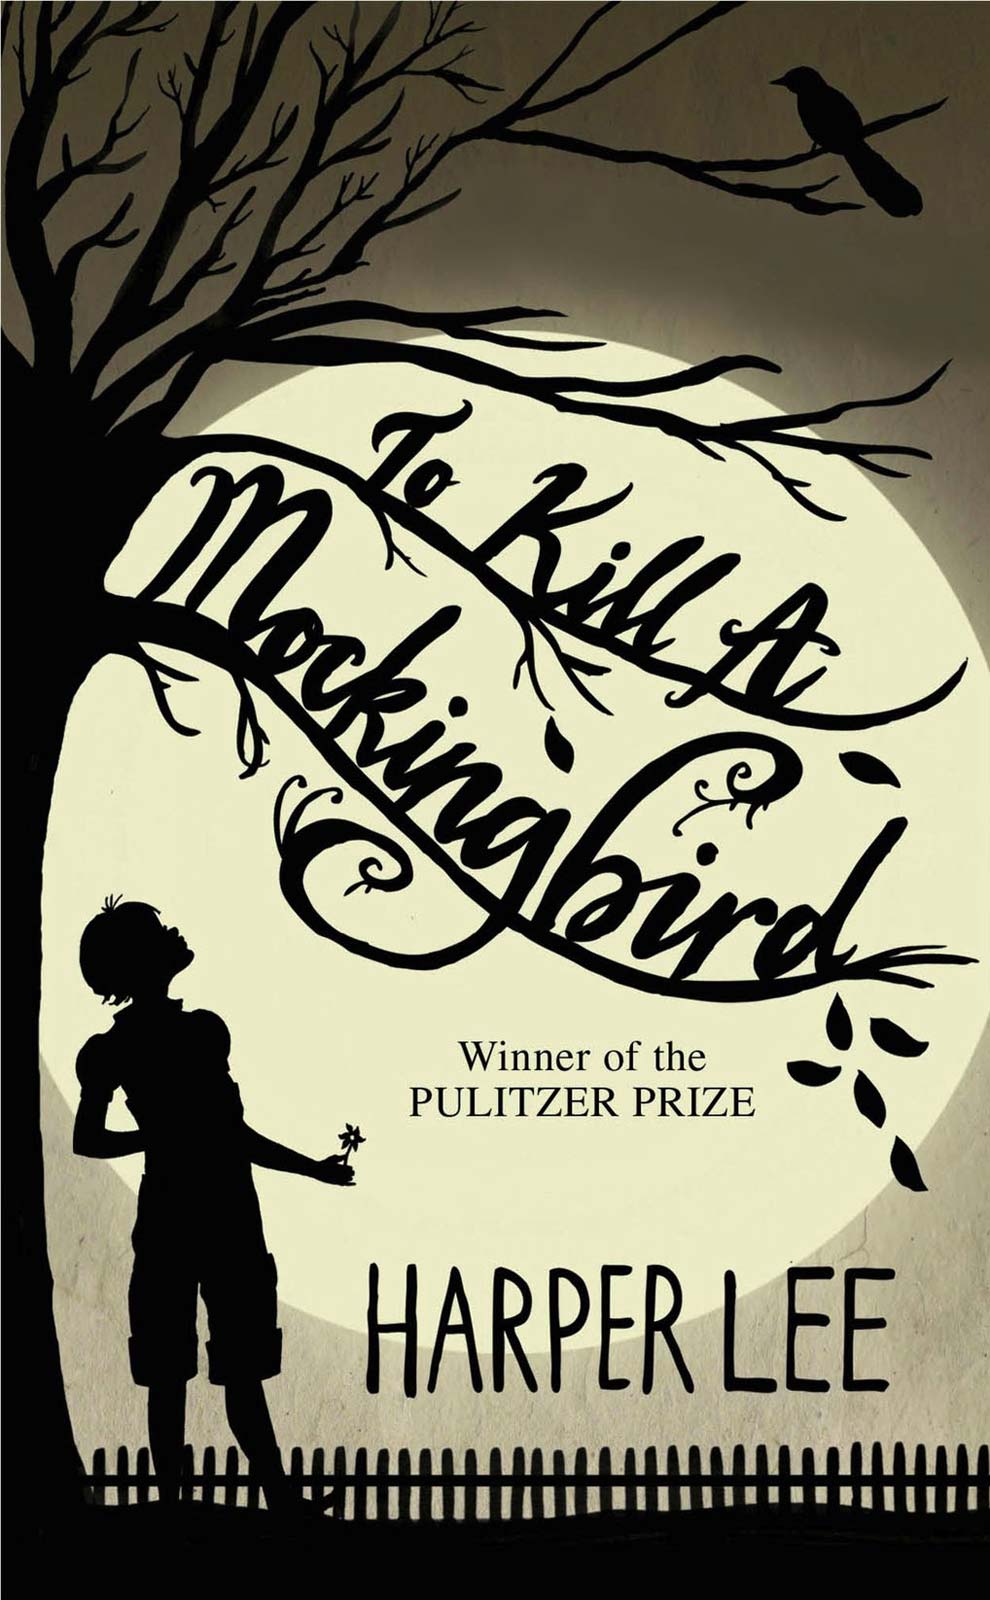 To Kill a Mockingbird audiobook carries an awareness of history to be better human beings